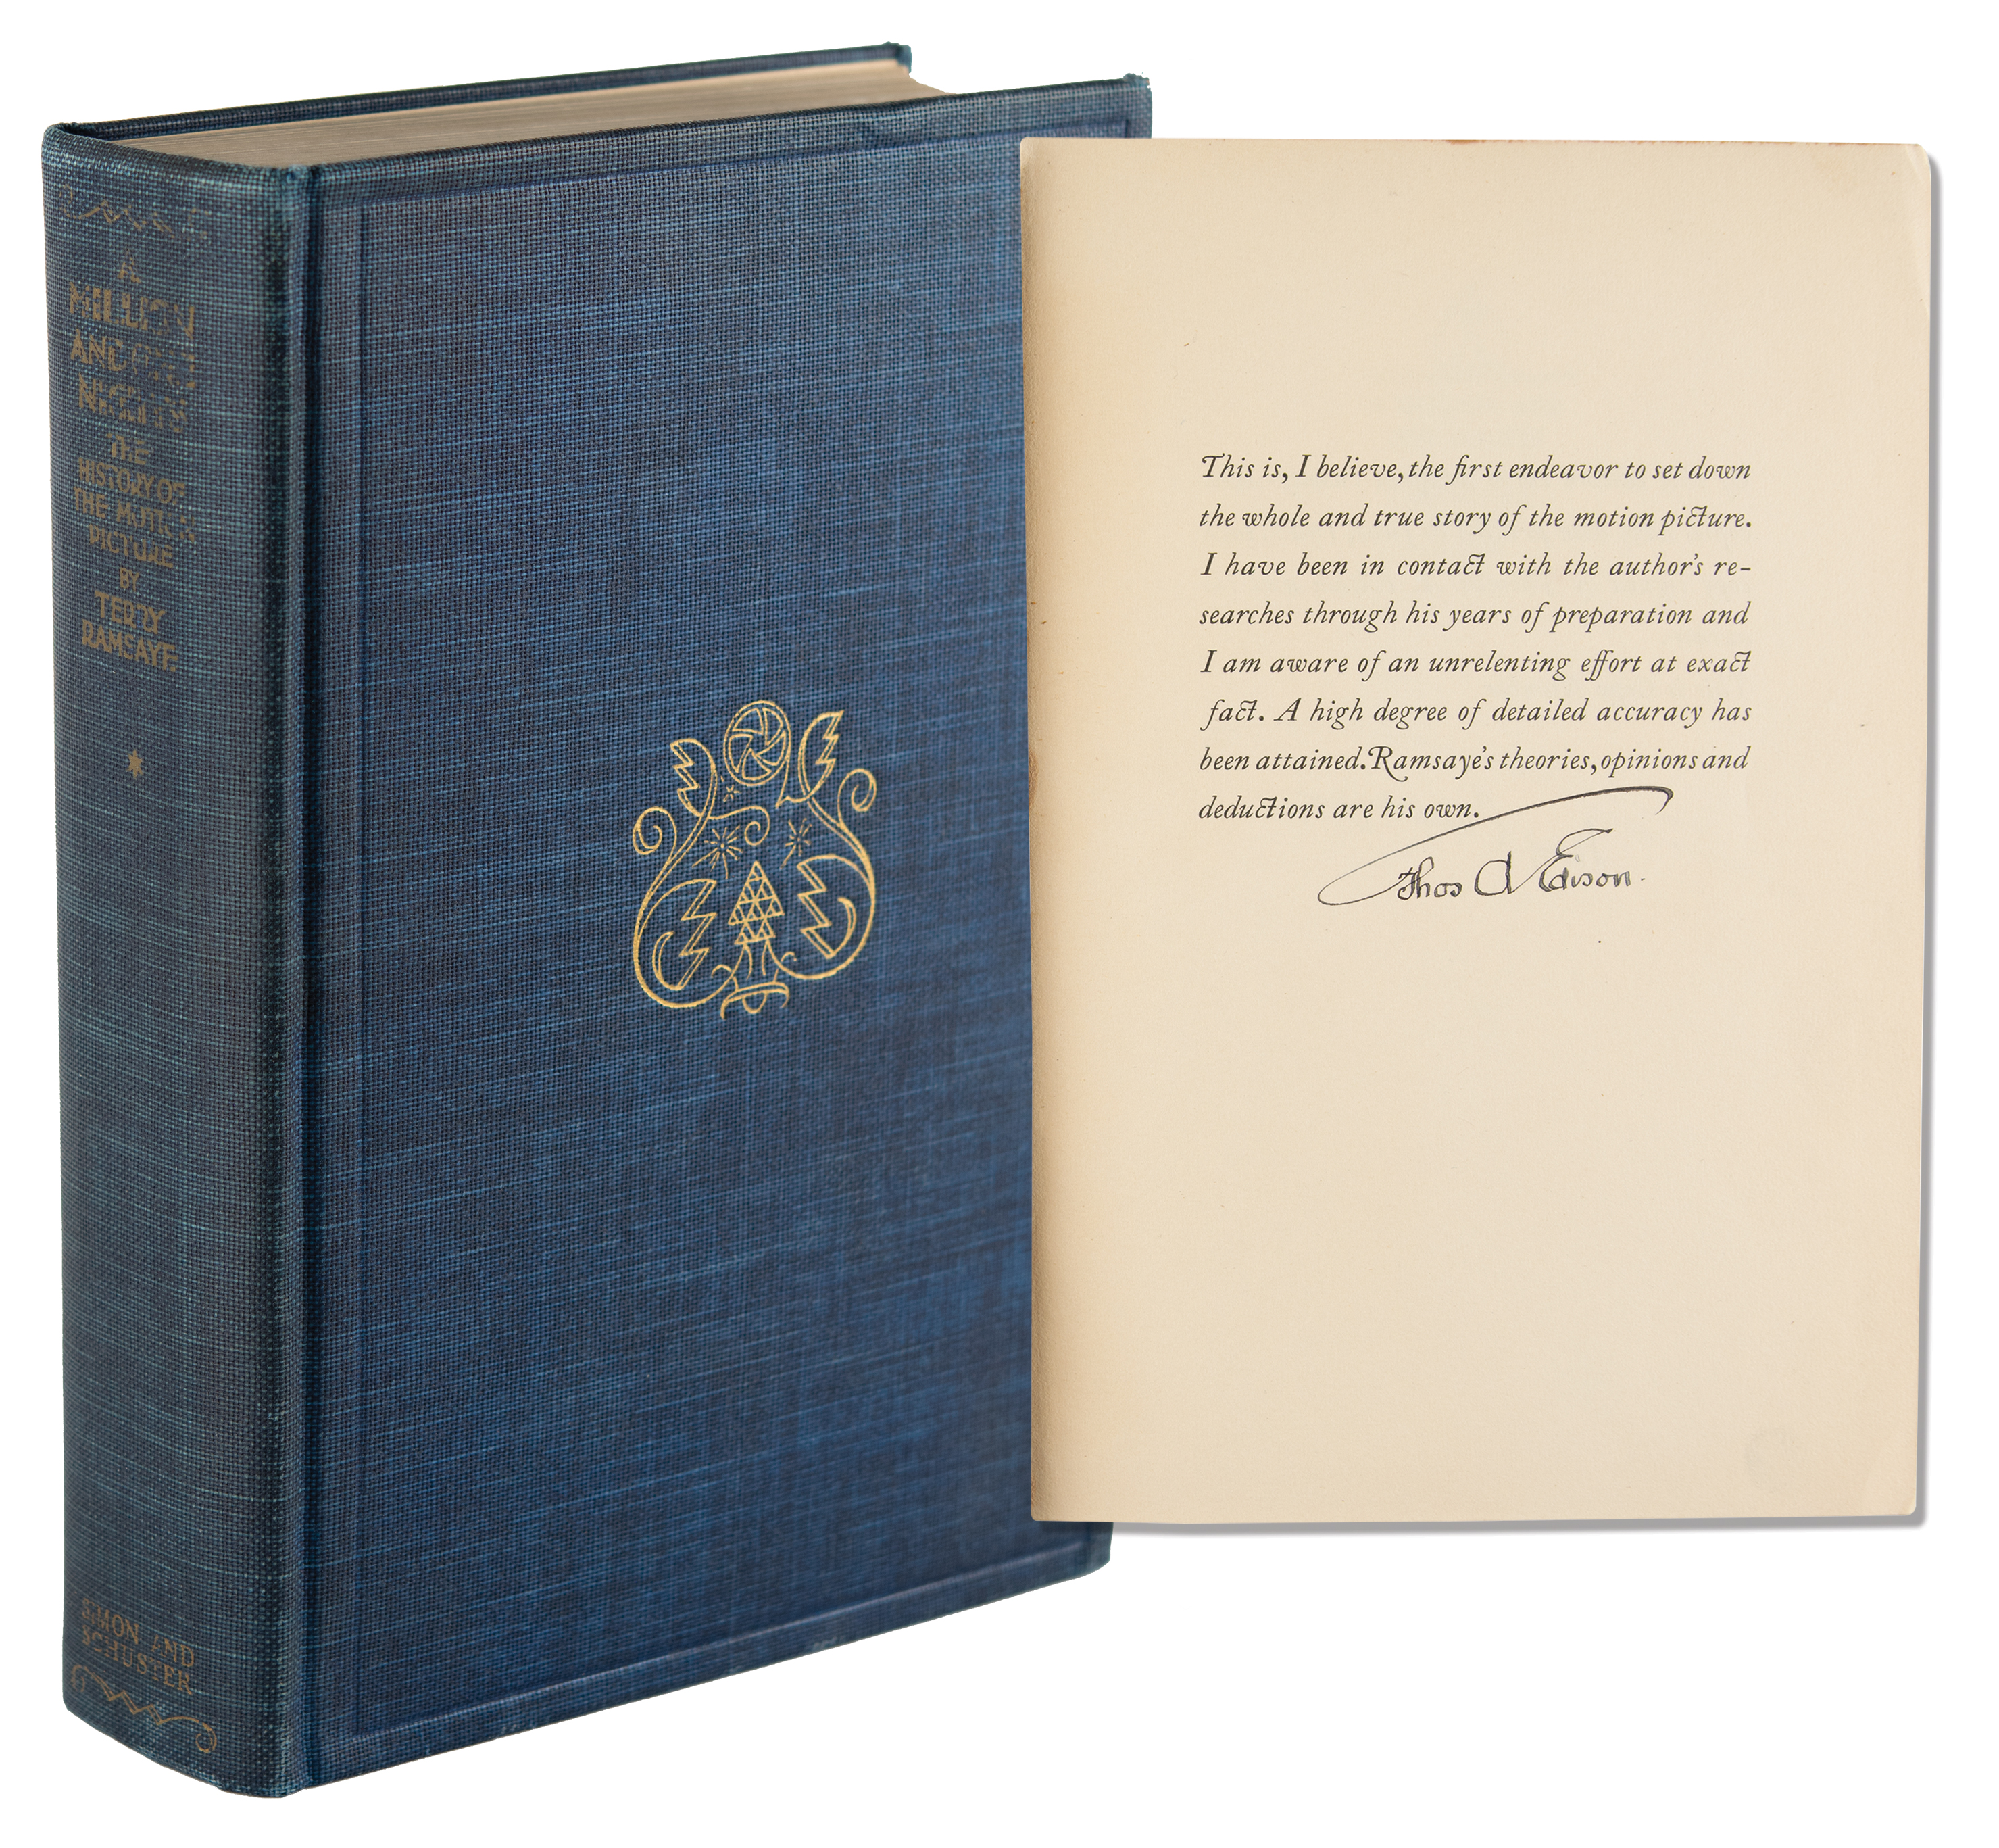 Lot #147 Thomas Edison Signed Limited Edition Book